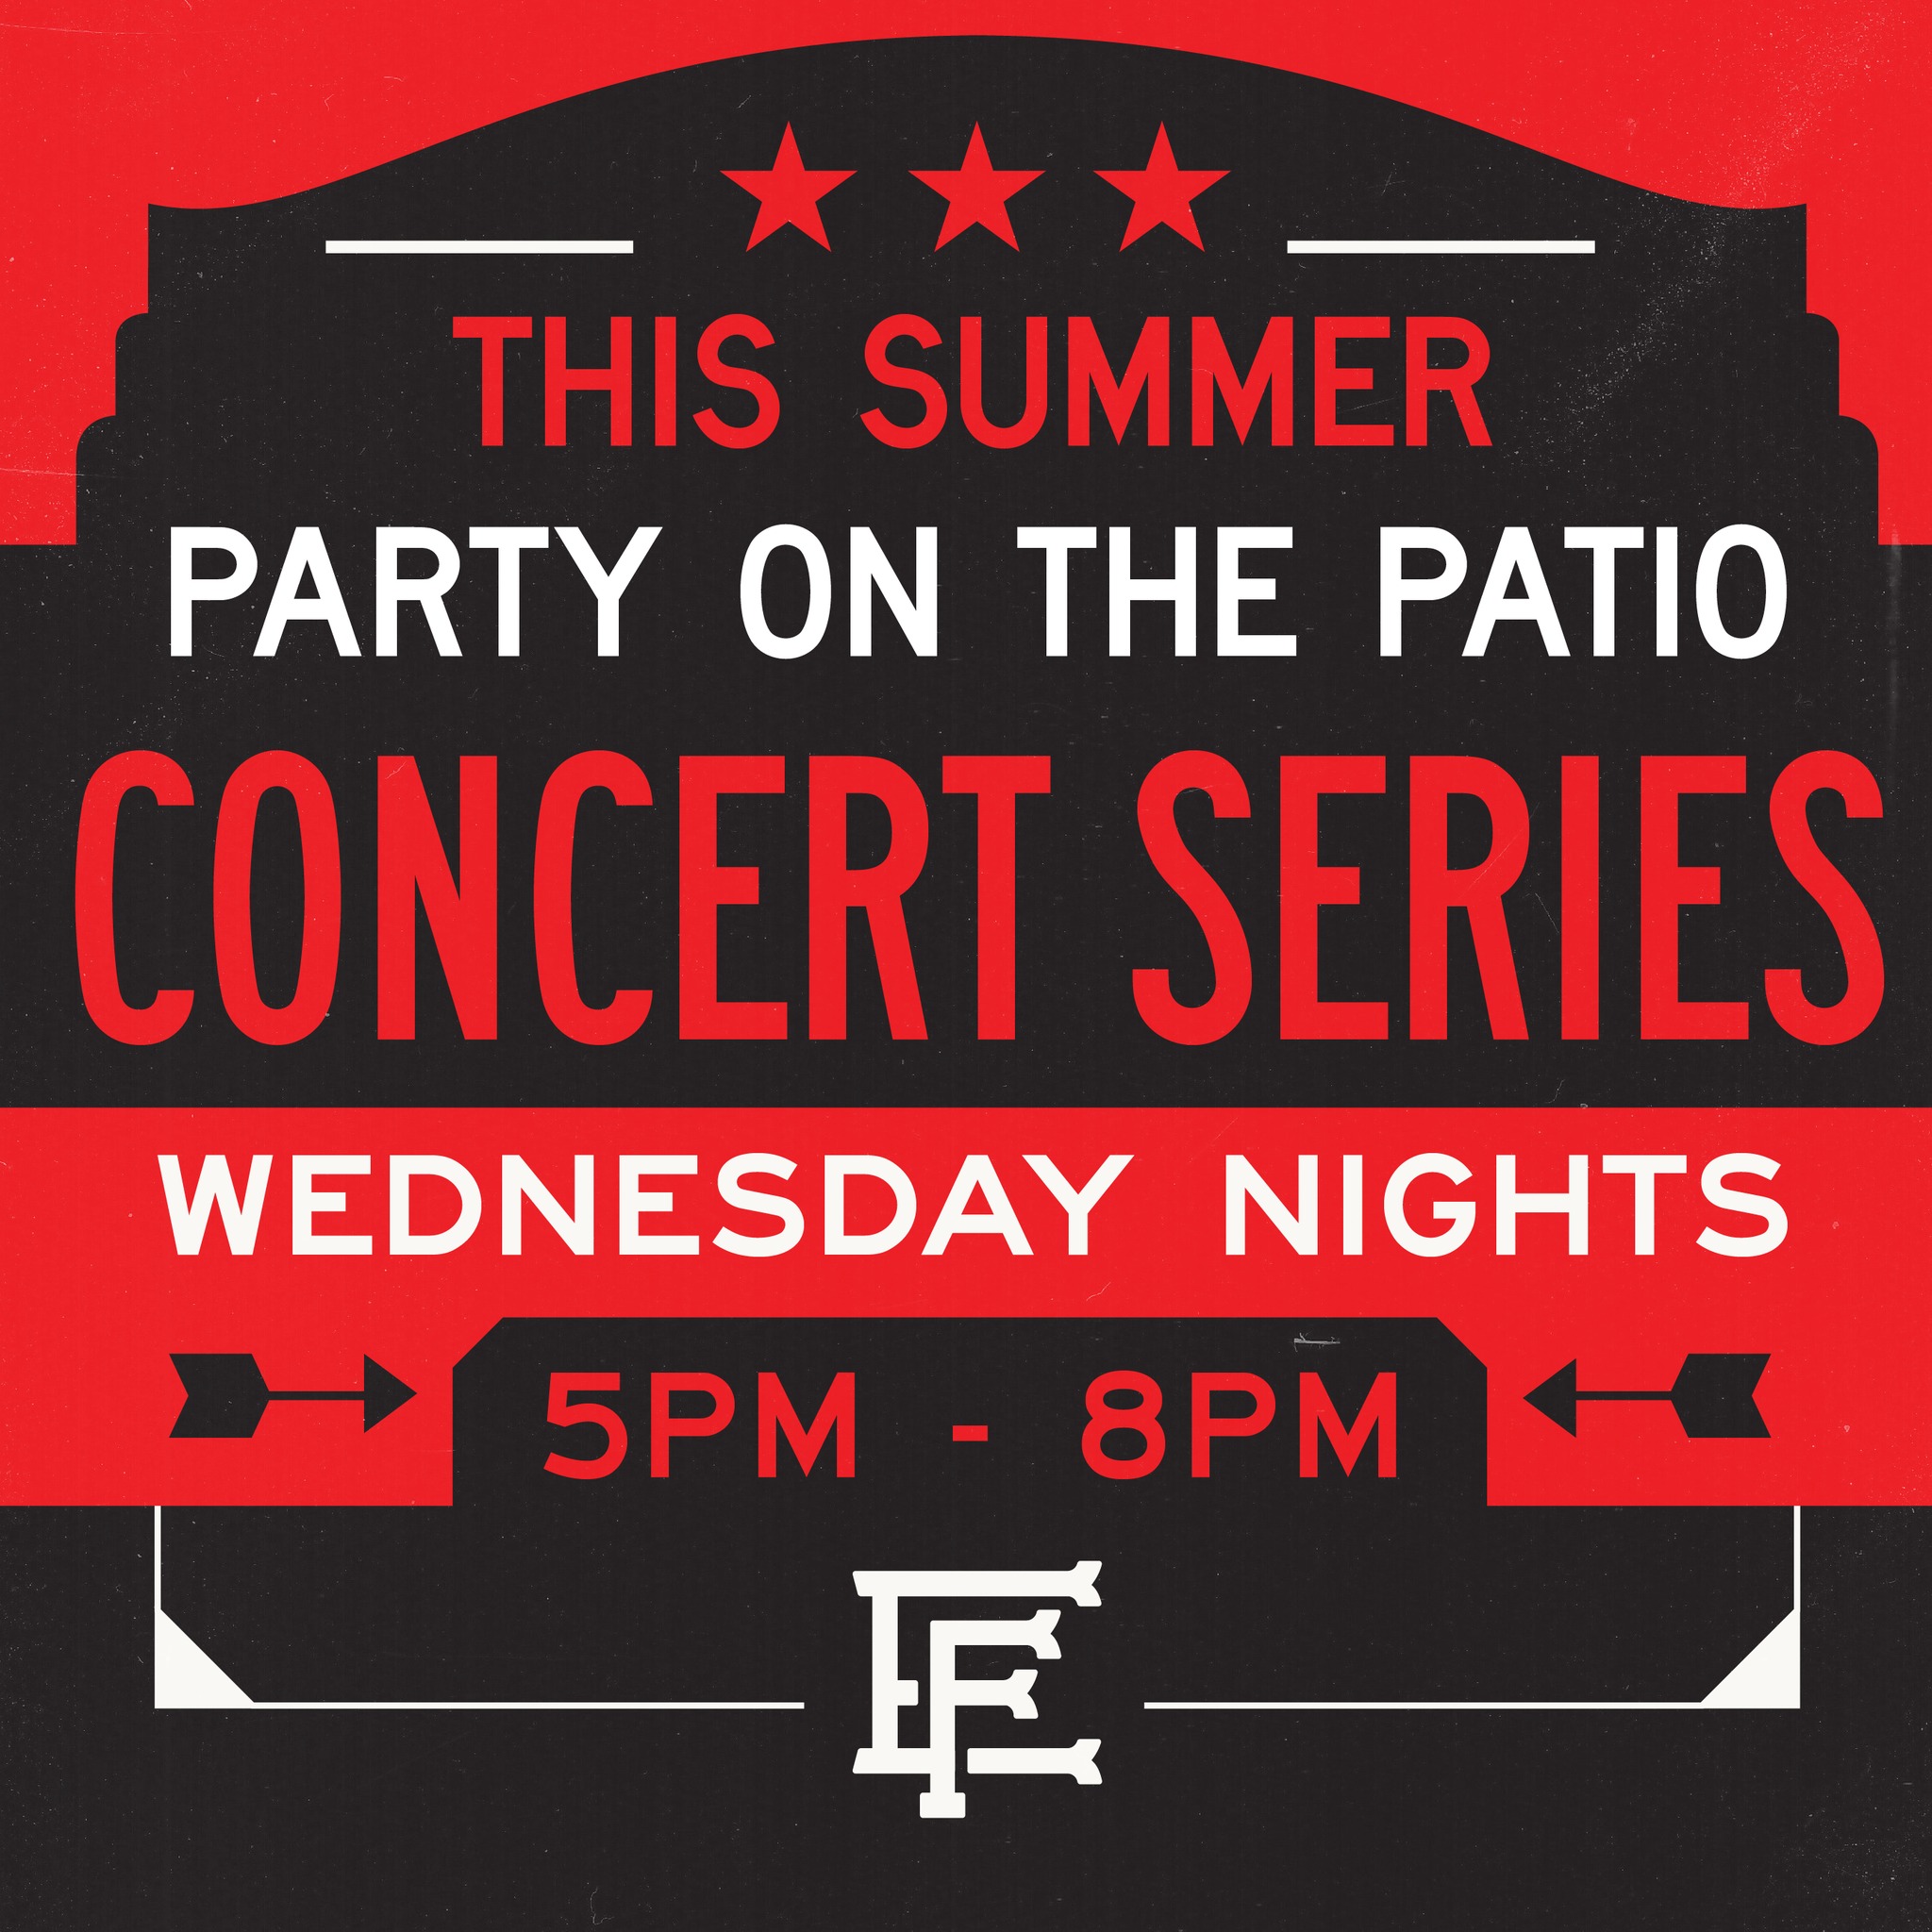 Summer Party On The Patio Concert Series at Ebbets Field